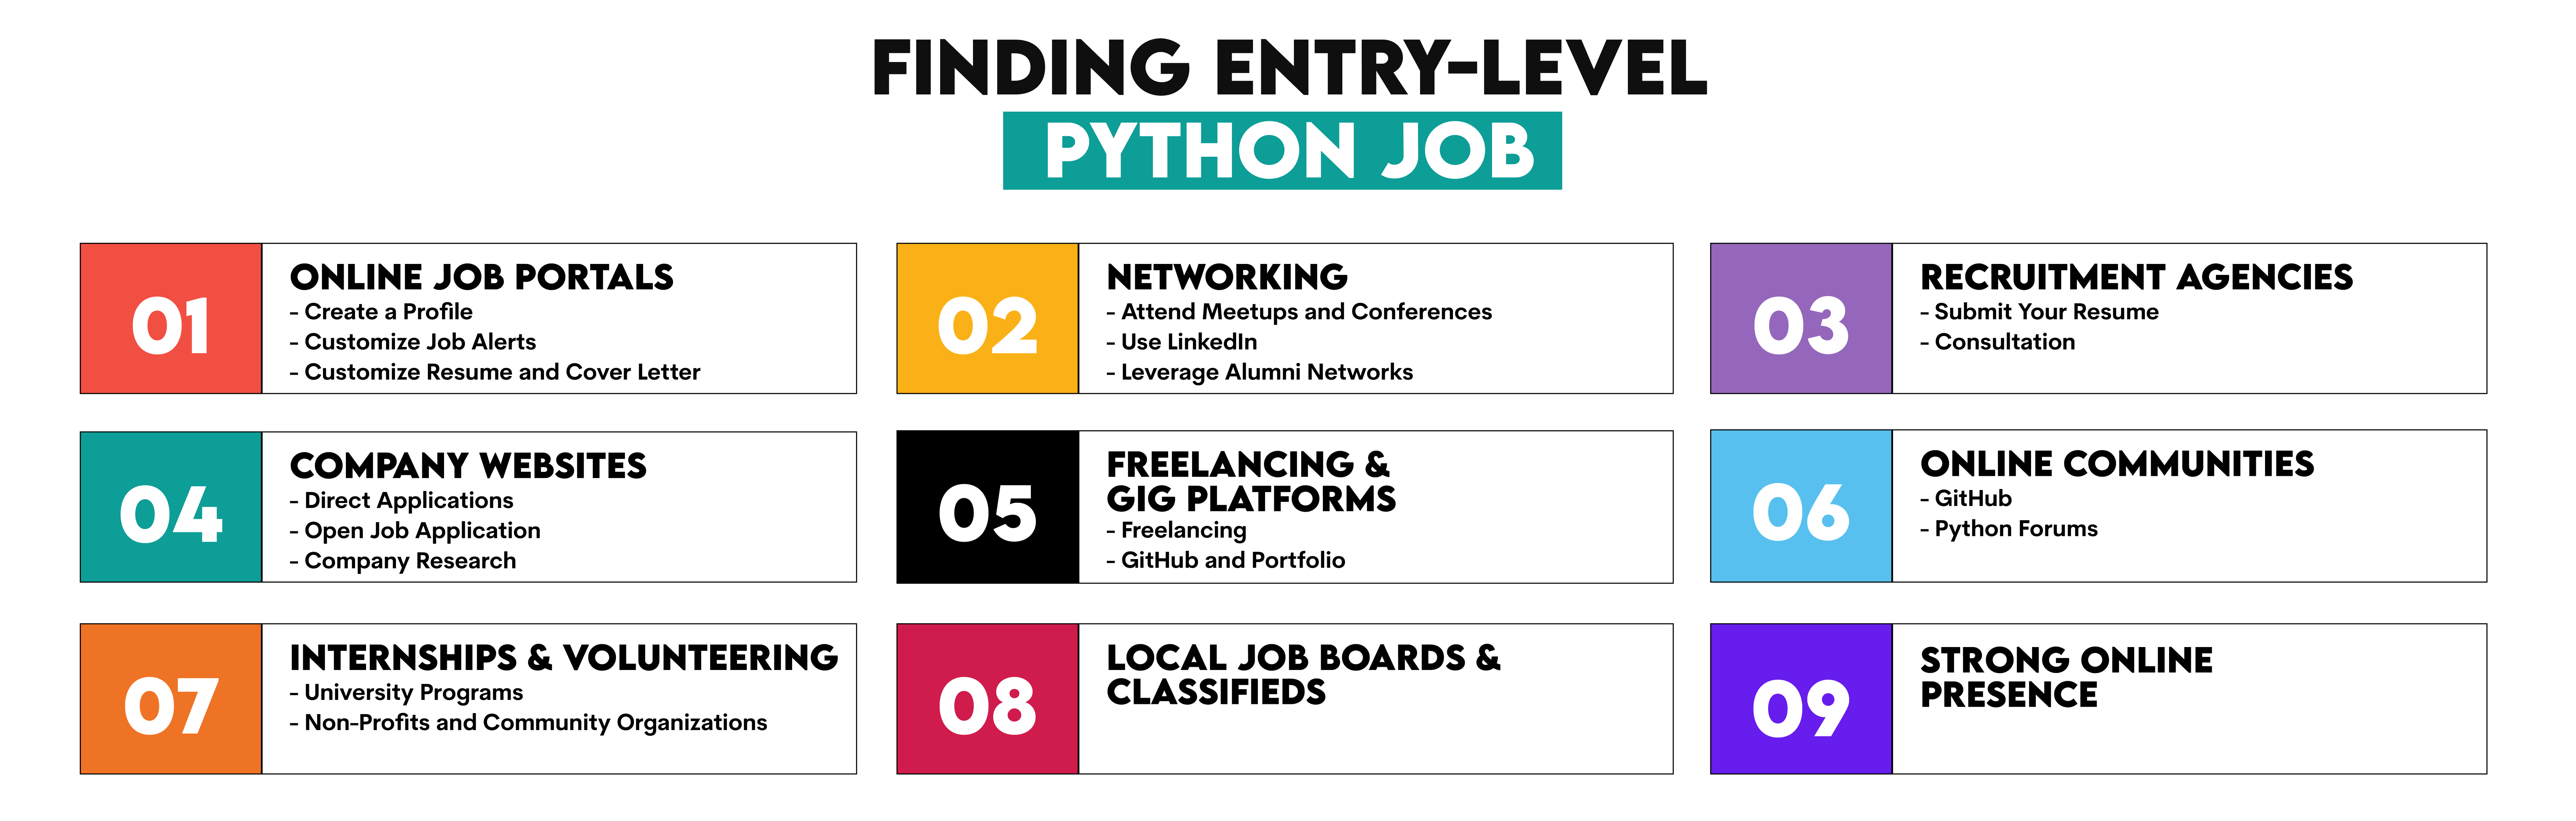 Finding Entry-Level Python Jobs